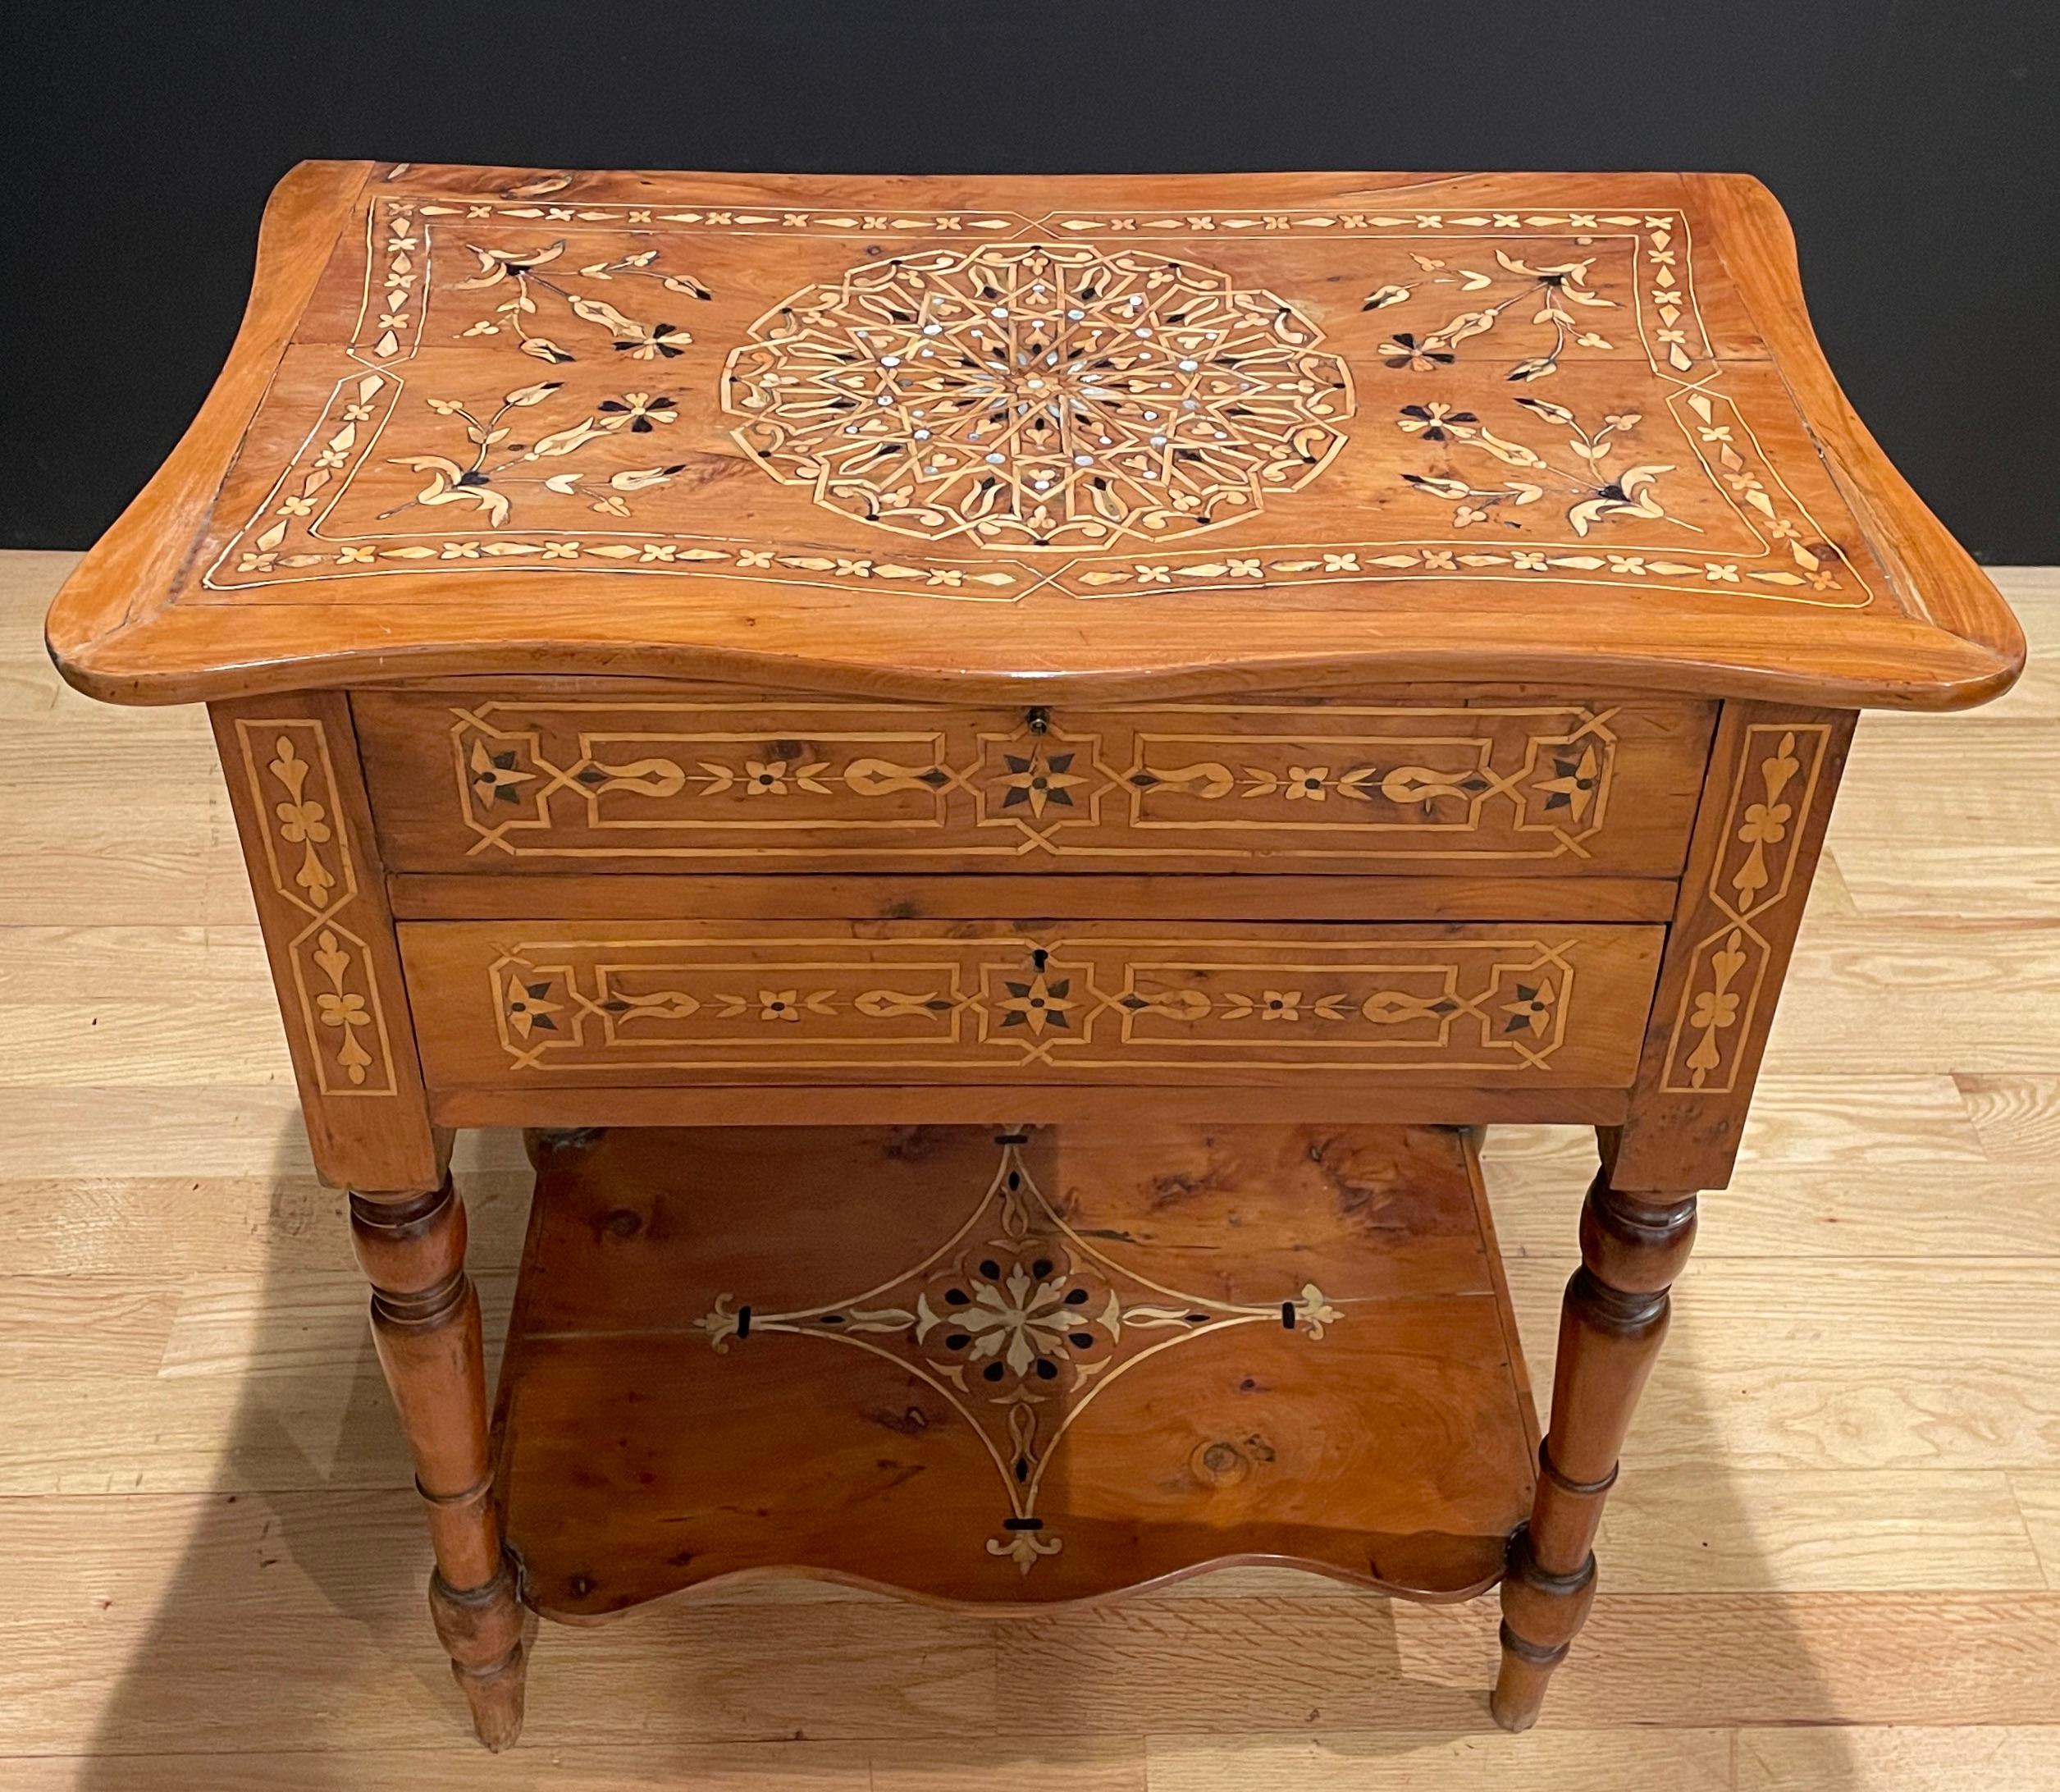 Fine quality Italian work table of light walnut with marquetry inlay of ebony, pear wood and abalone/mother-of-pearl. Lift top with one draw and bottom shelf with turned legs.